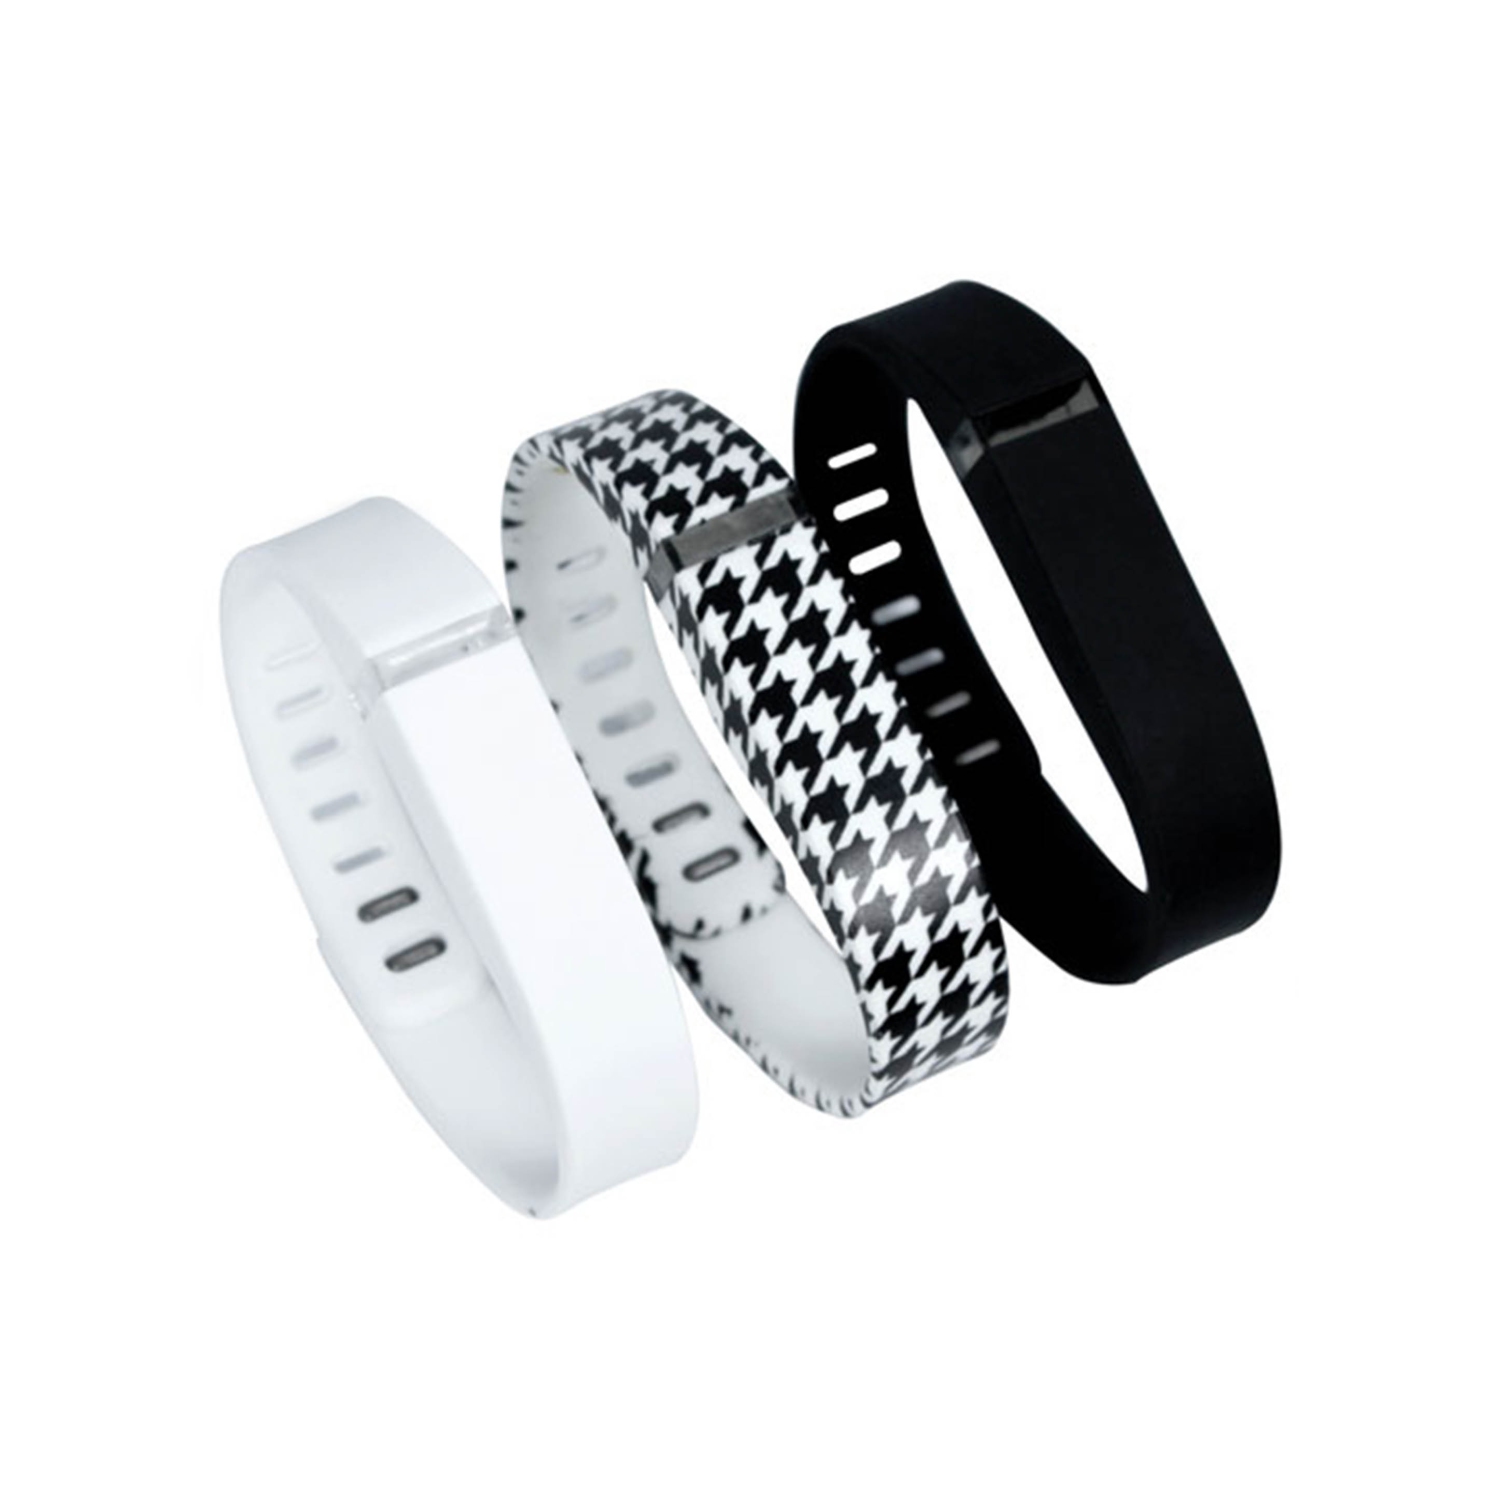 Adreama Silicone Replacement Band for Fitbit Flex - 3 pack (White/Houndstooth/Black)